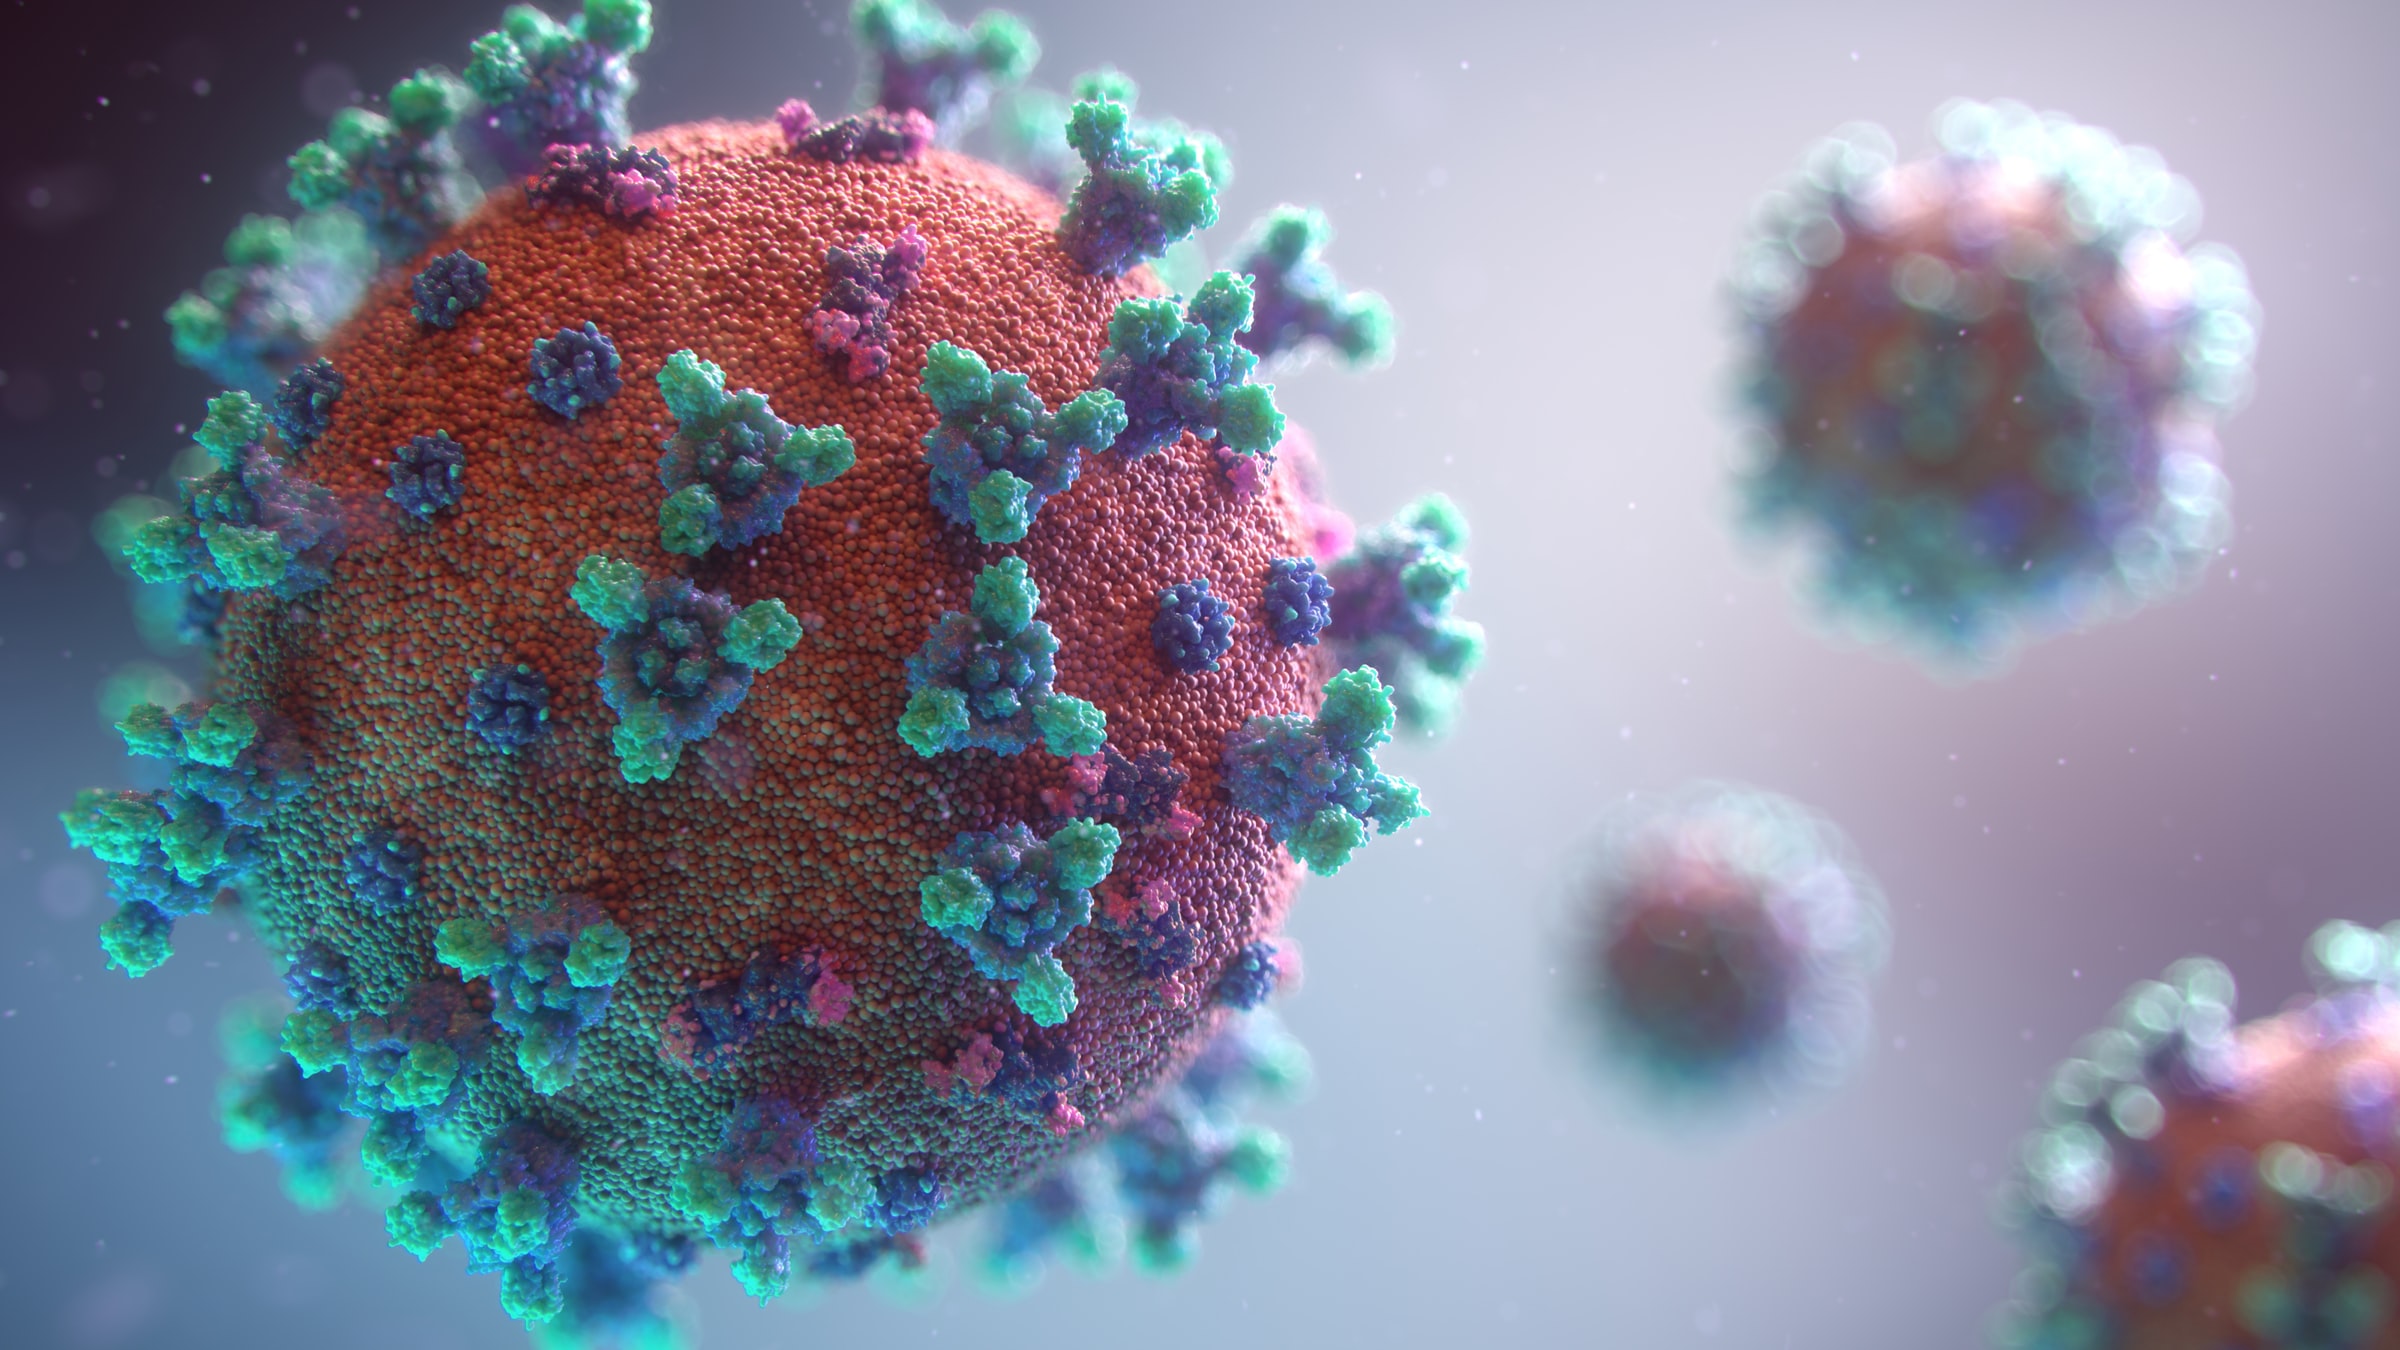 200401 - New visualisation of the Covid-19 virus by Fusion Medical Animation Licence Unsplash - La Déviation